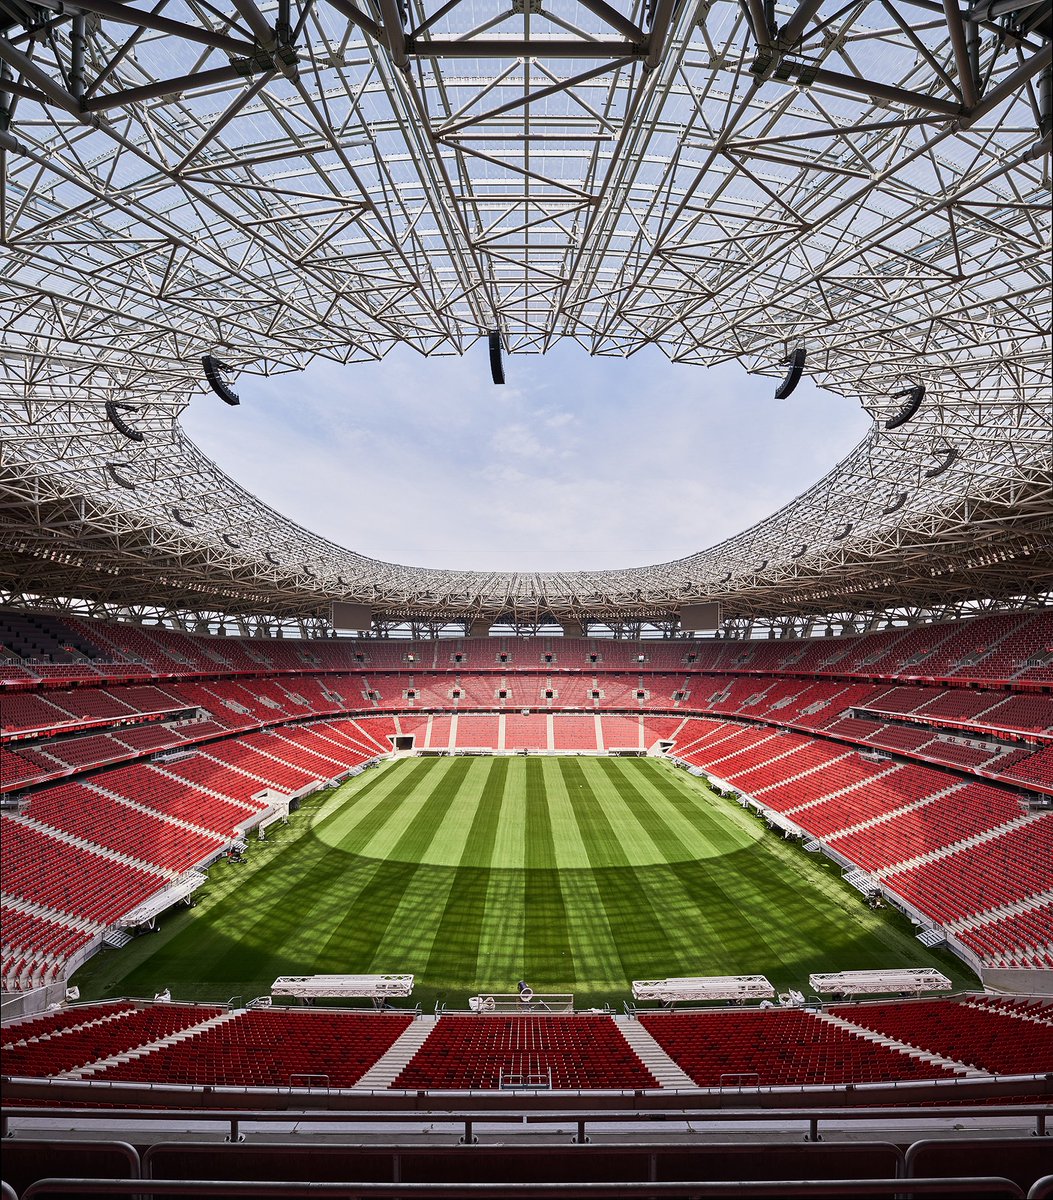 Official: The 2026 Champions League final will take place at the Puskás Aréna in Budapest, Hungary